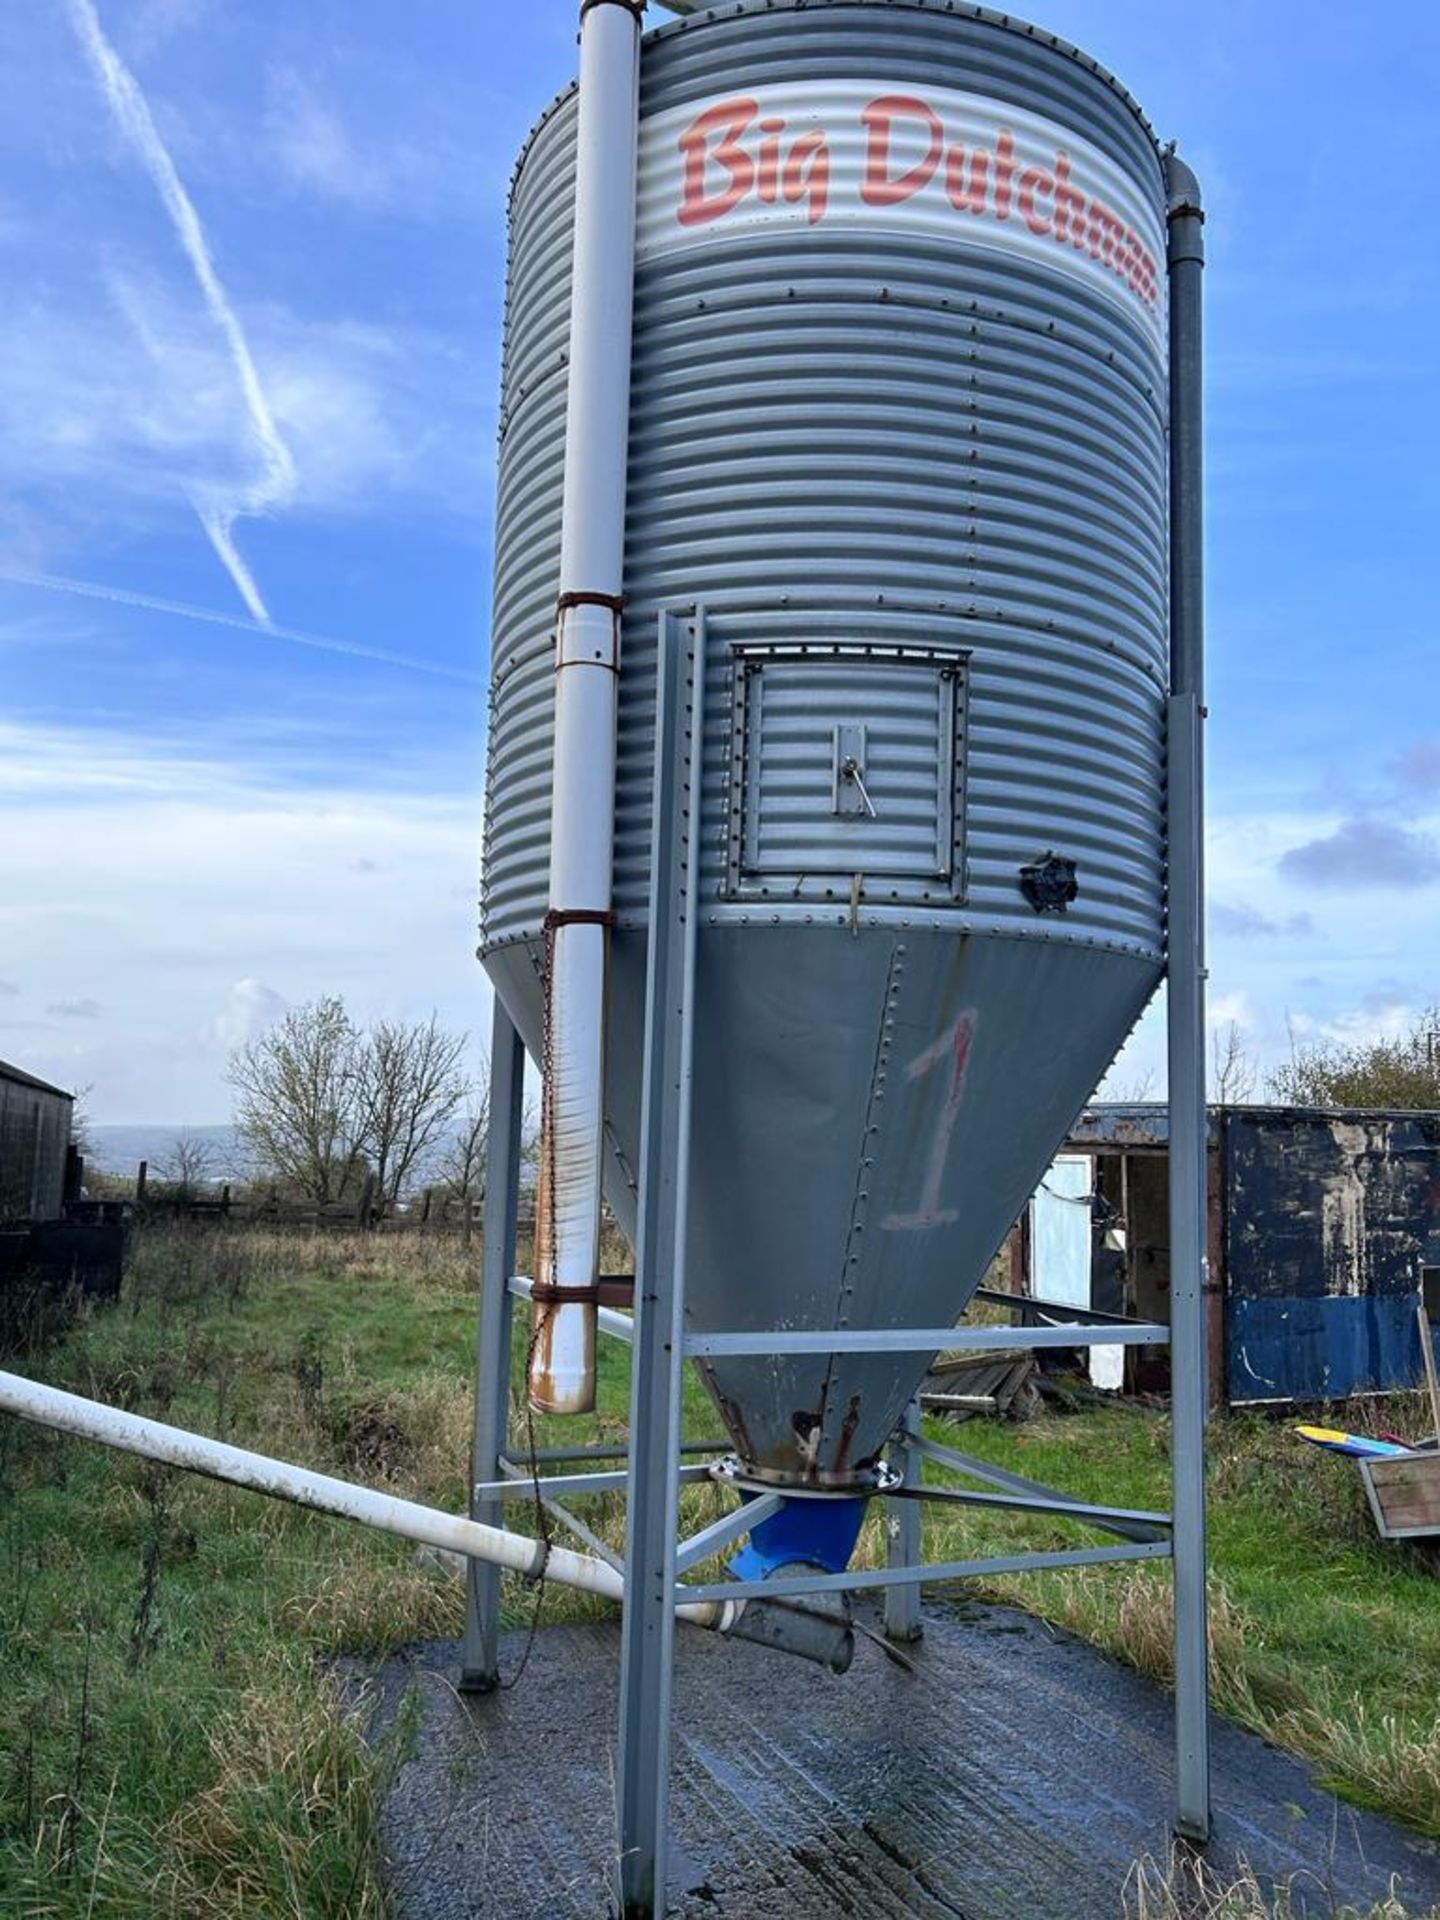 BIG DUTCHMAN GRAIN SILO NO VAT TO BE COLLECTED FROM OLDHAM OL15 0RA THE VENDOR WILL DELIVER AT A